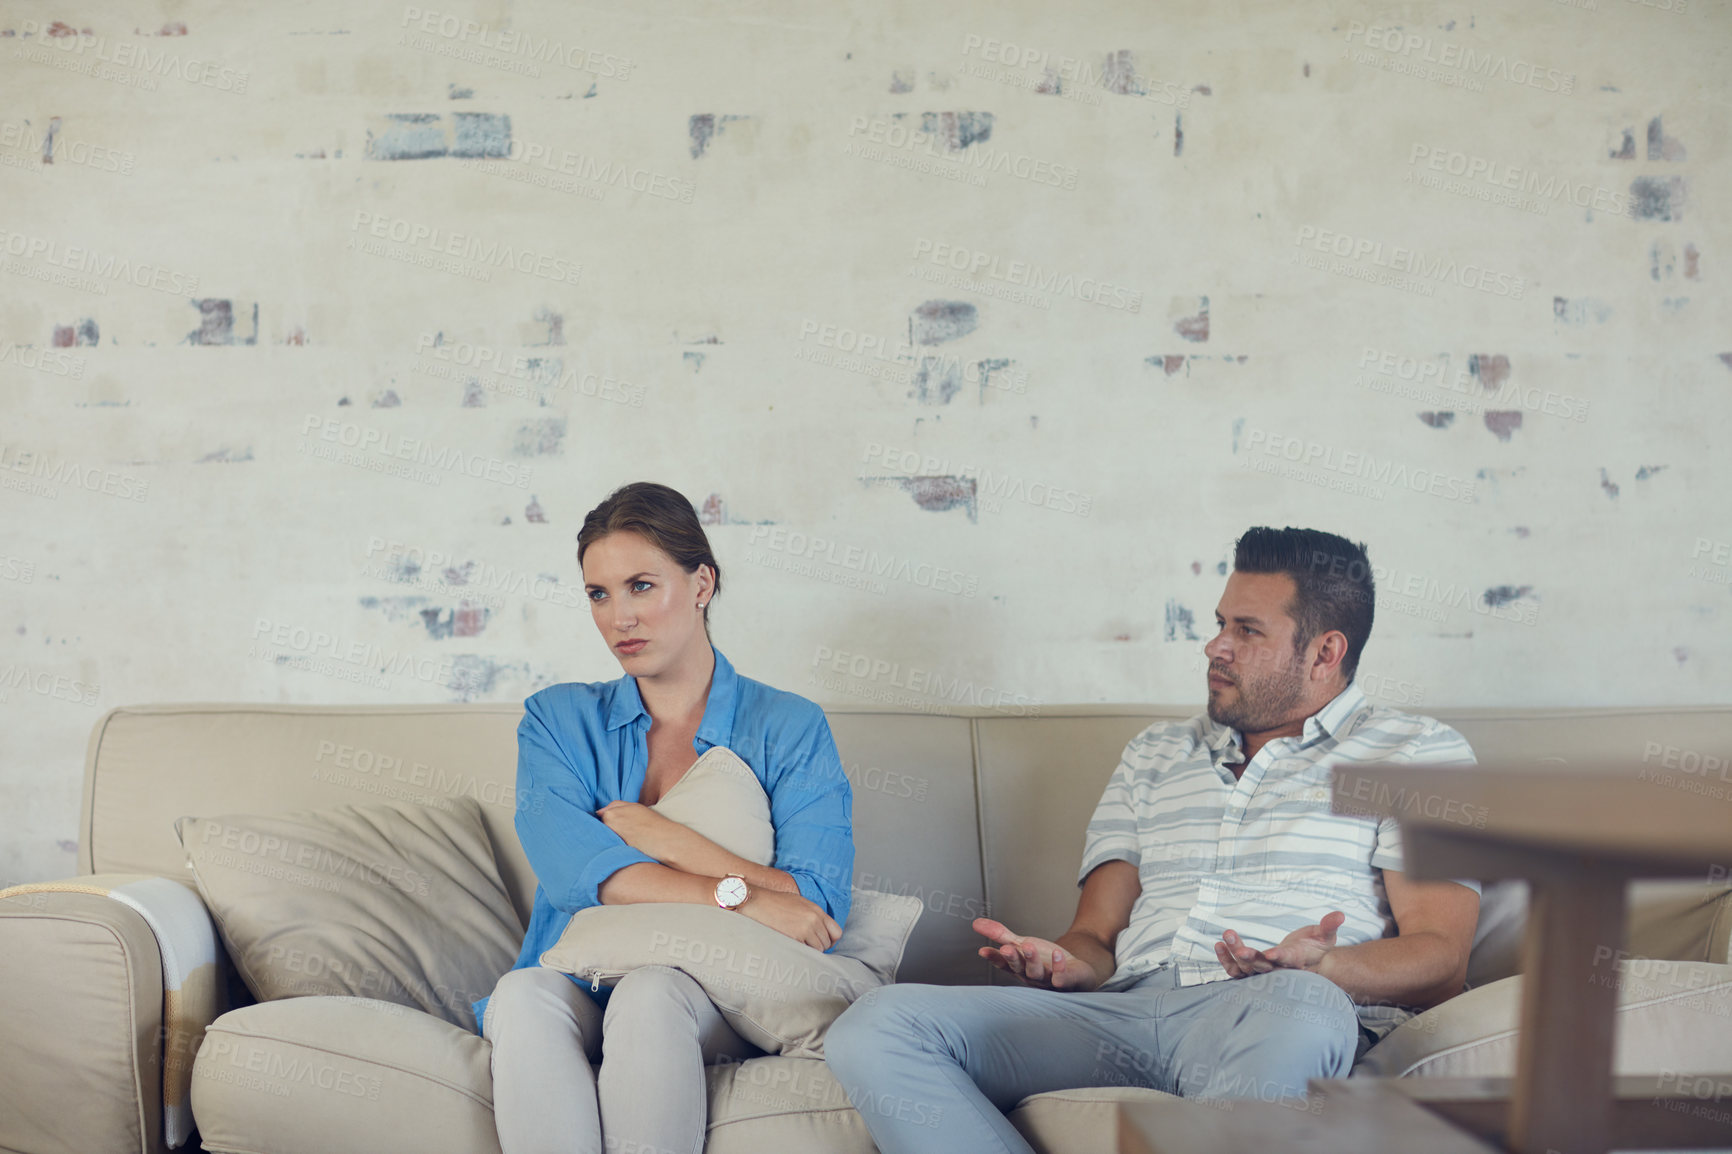 Buy stock photo Cropped shot of a young married couple having a disagreement in the living room at home